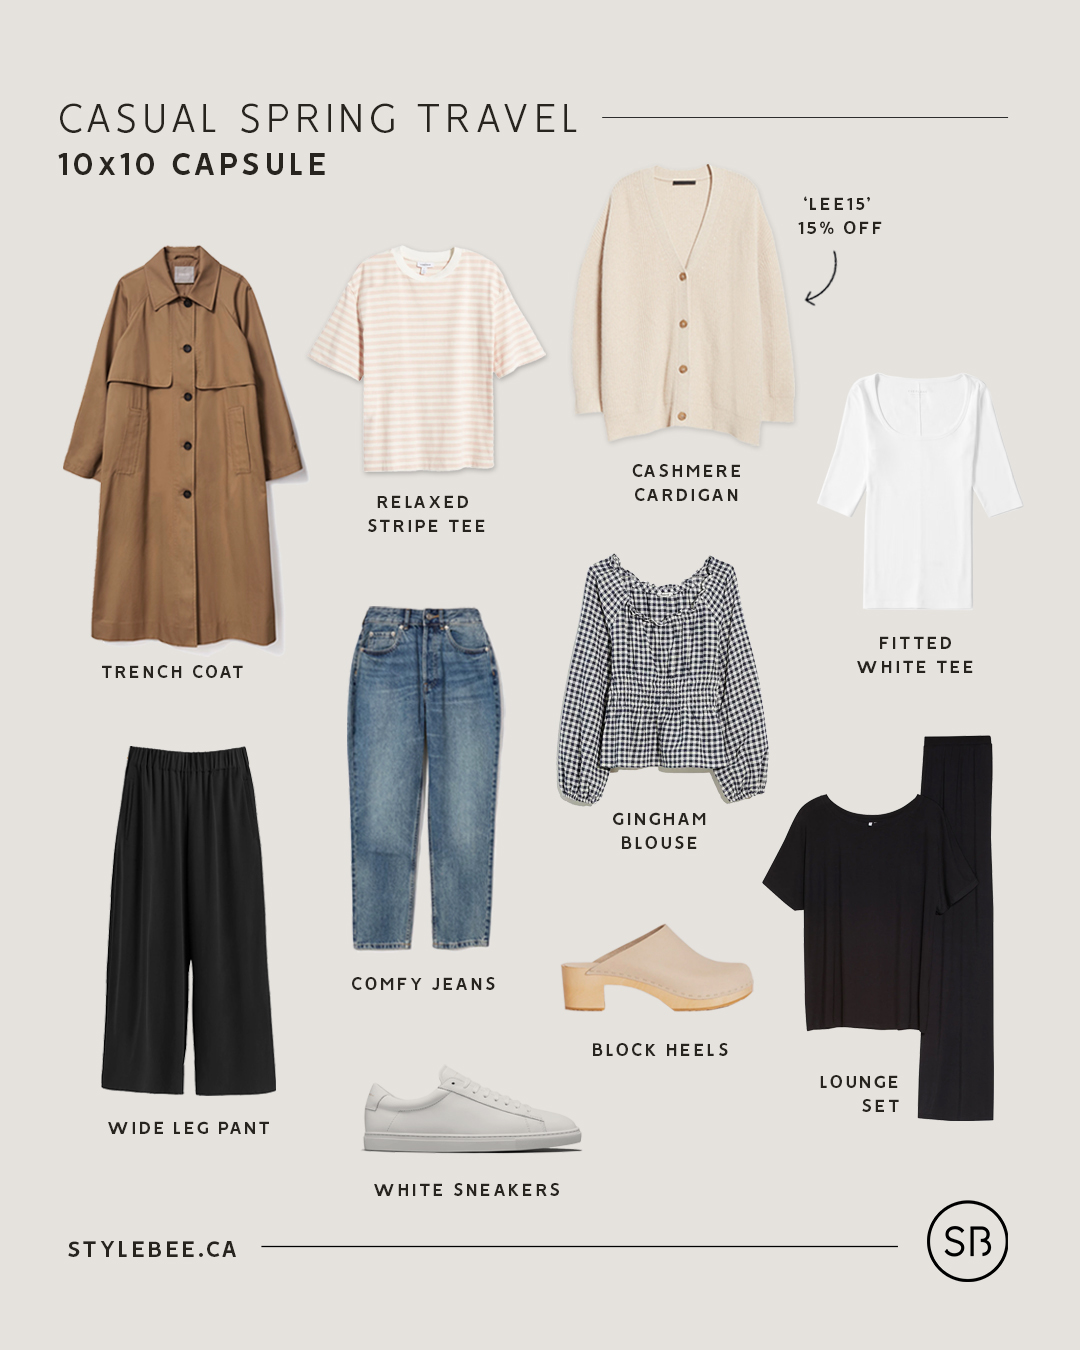 A Spring Travel Capsule Wardrobe Based on Your Trip Length